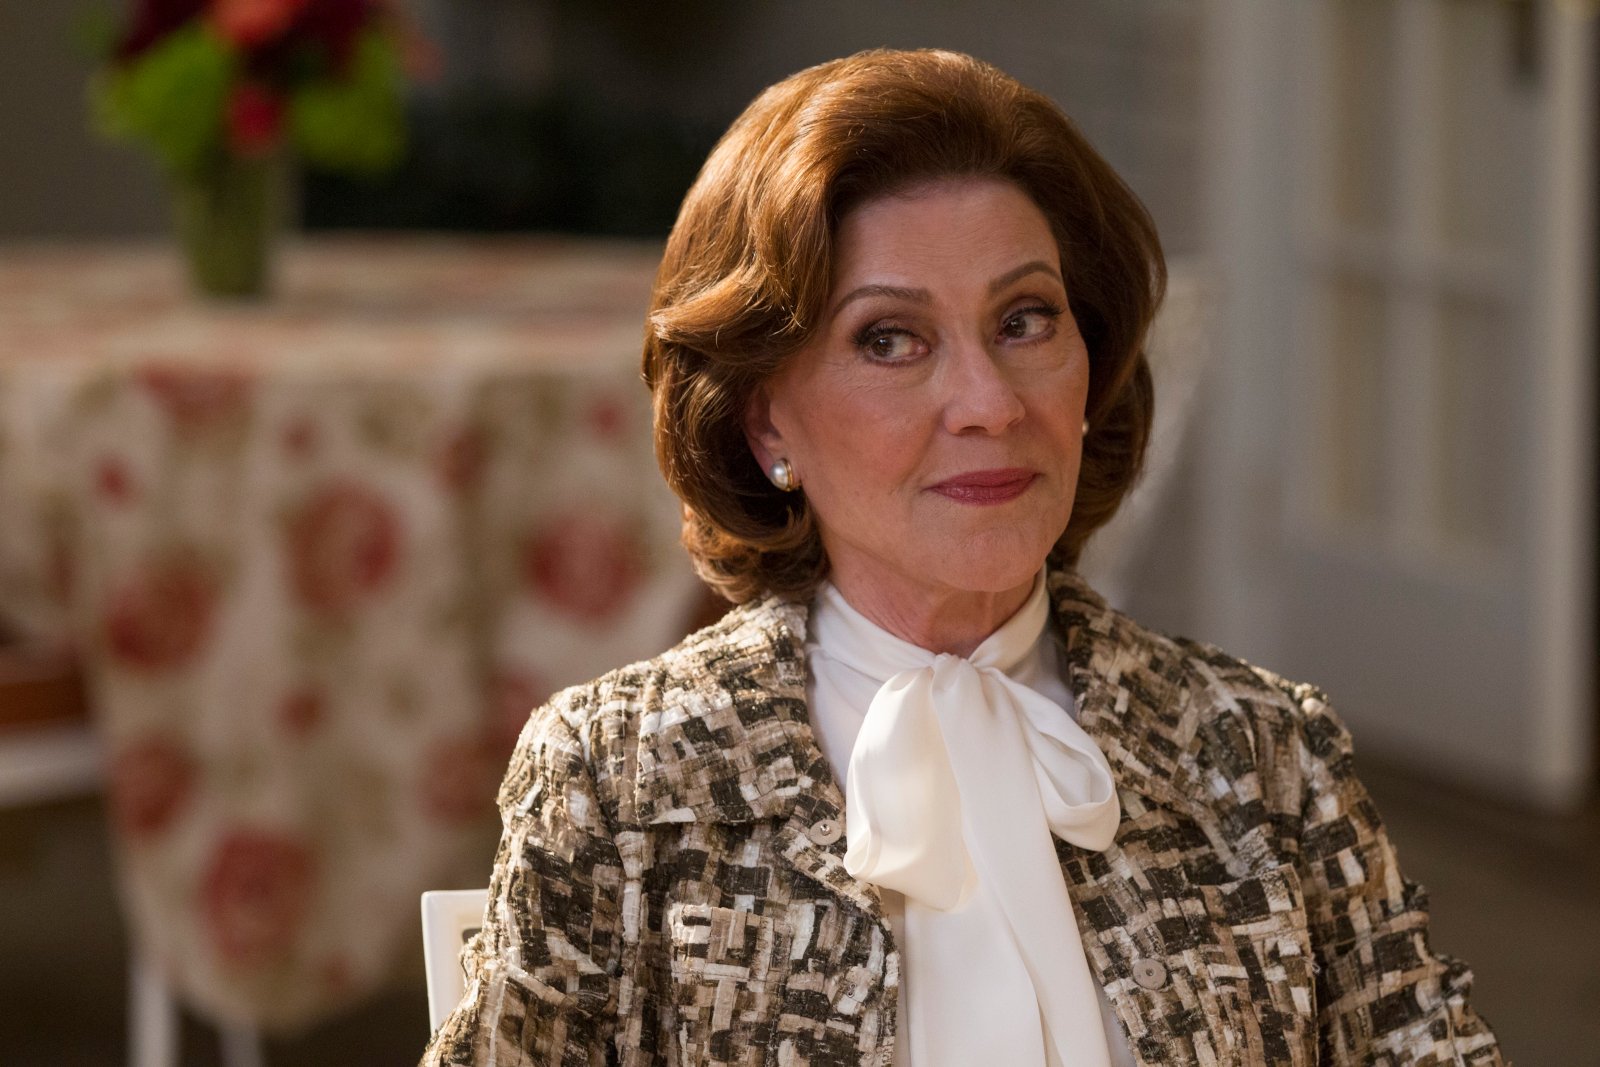 Kelly Bishop as Emily Gilmore in 'Gilmore Girls: A Year inthe Life.' She's wearing a white blouse and blazer.